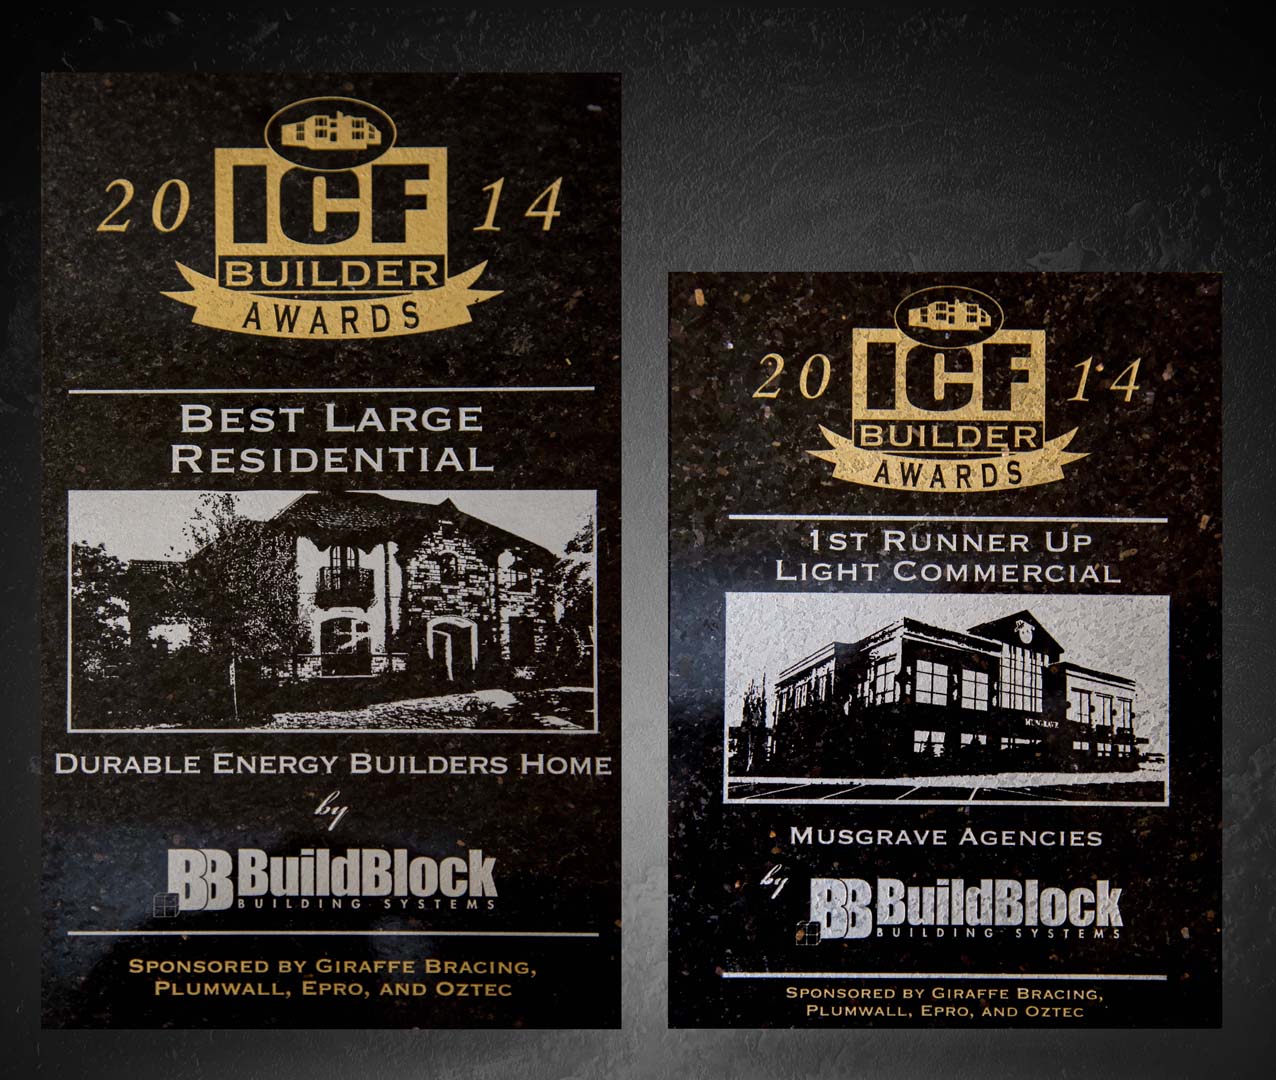 Press Release: BuildBlock Building Systems Projects Win Two National Awards